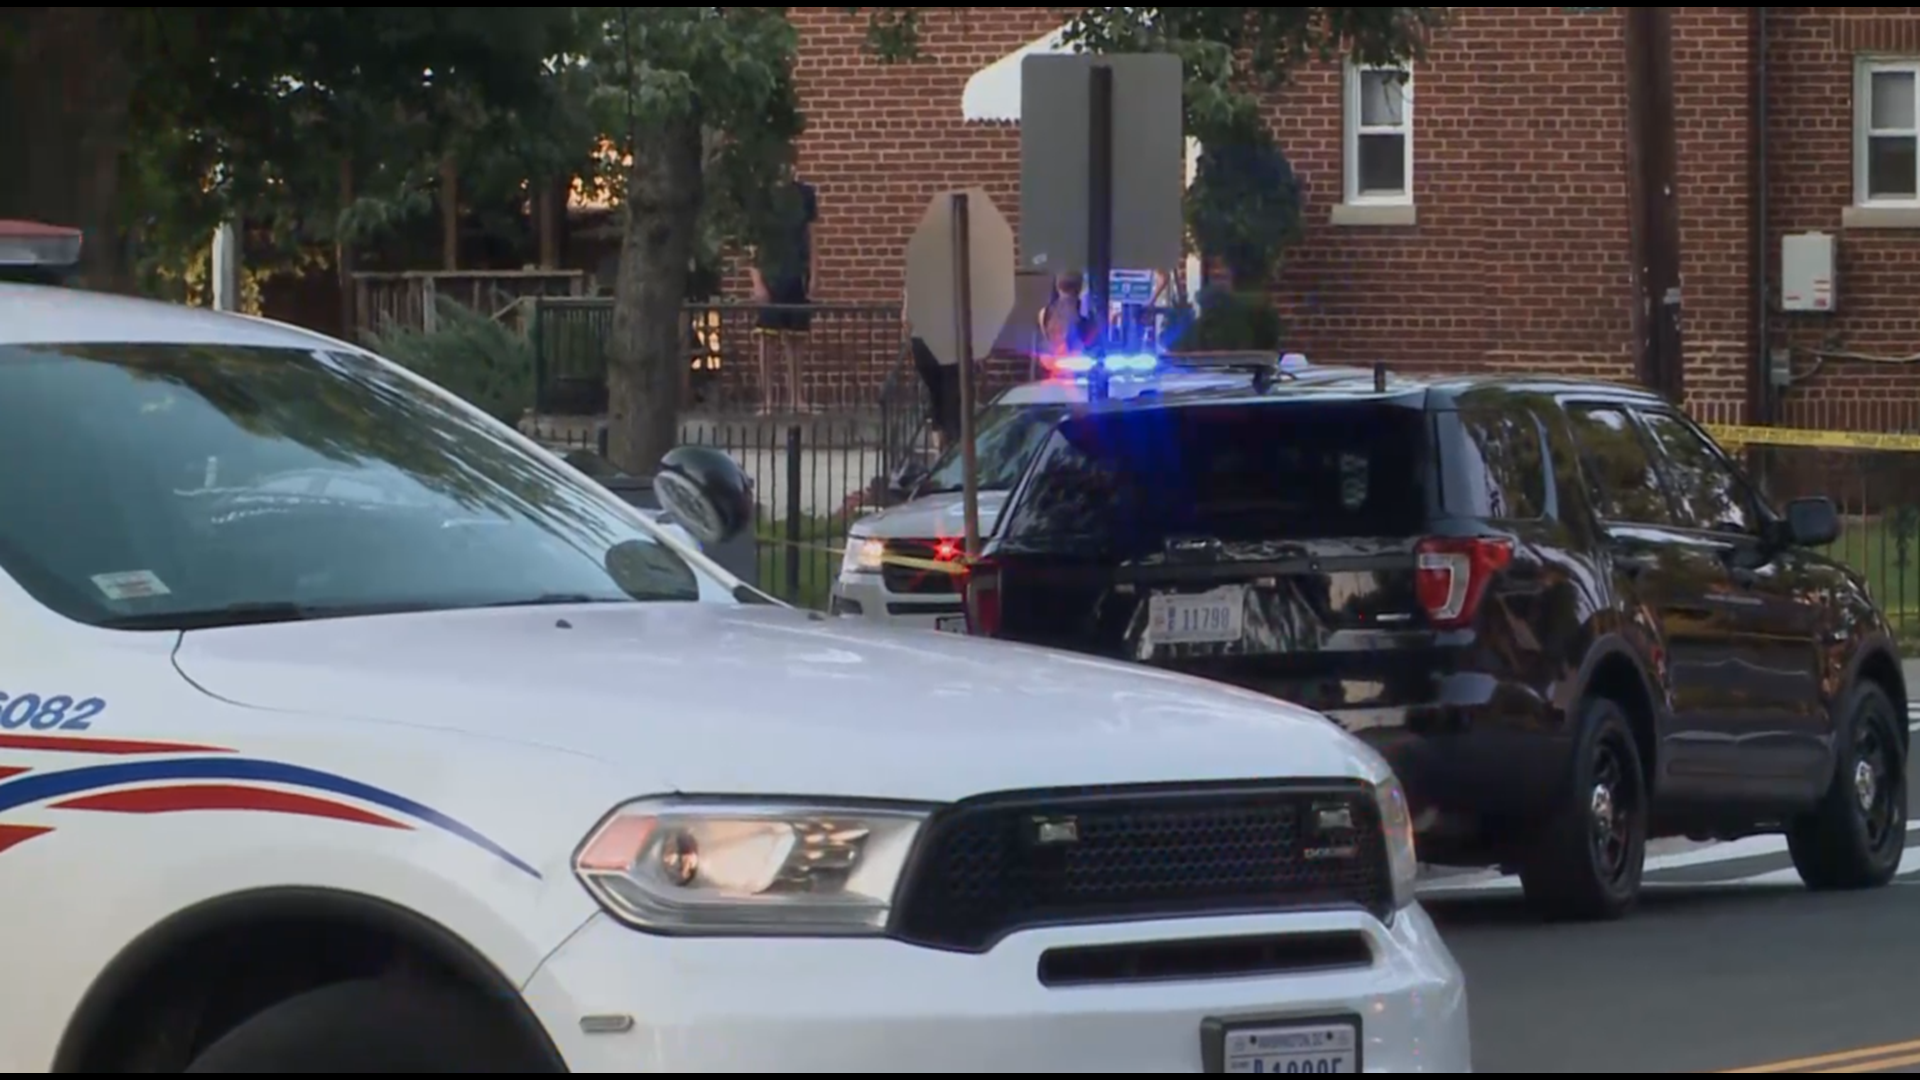 D.C. Police said it is investigating a shooting in Southeast that involves an officer in its department that has left a man with a gunshot injury.